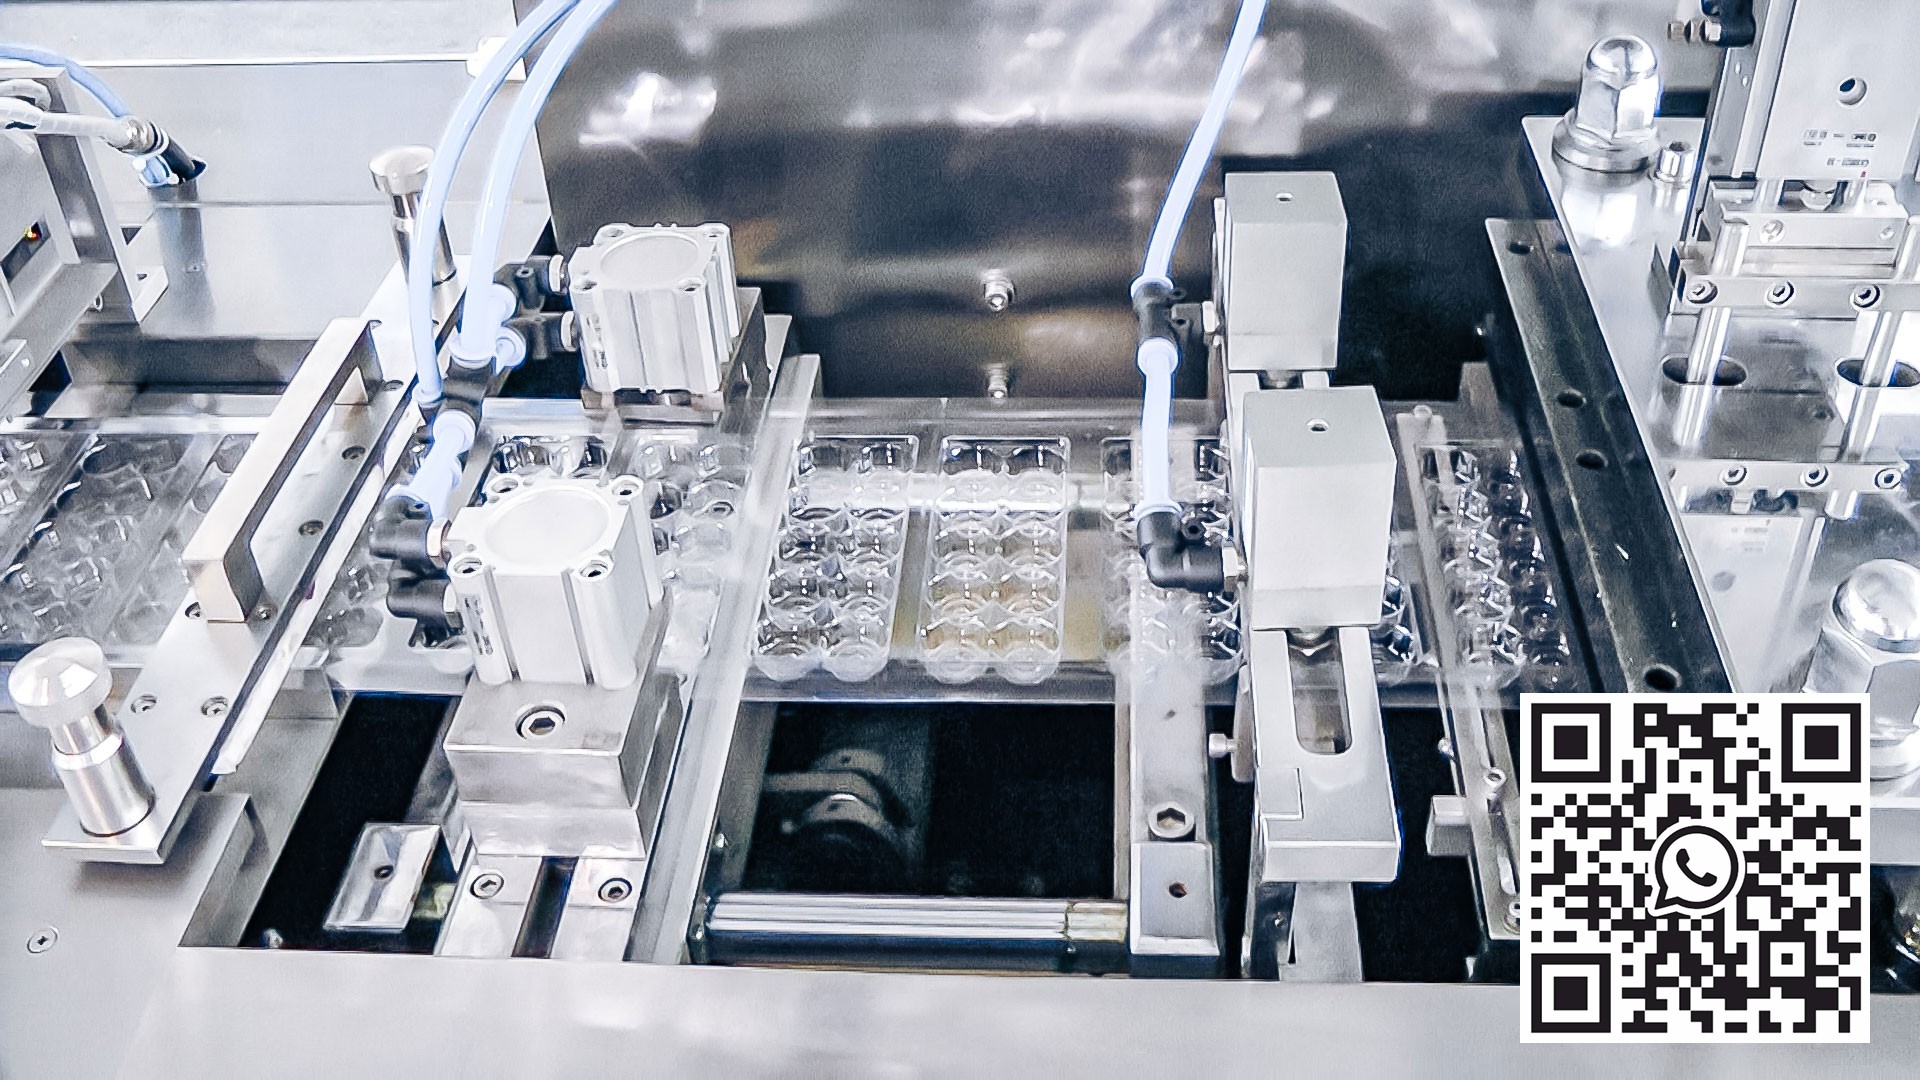 Automatic equipment for packing penicillin vials into plastic blisters in pharmaceutical production